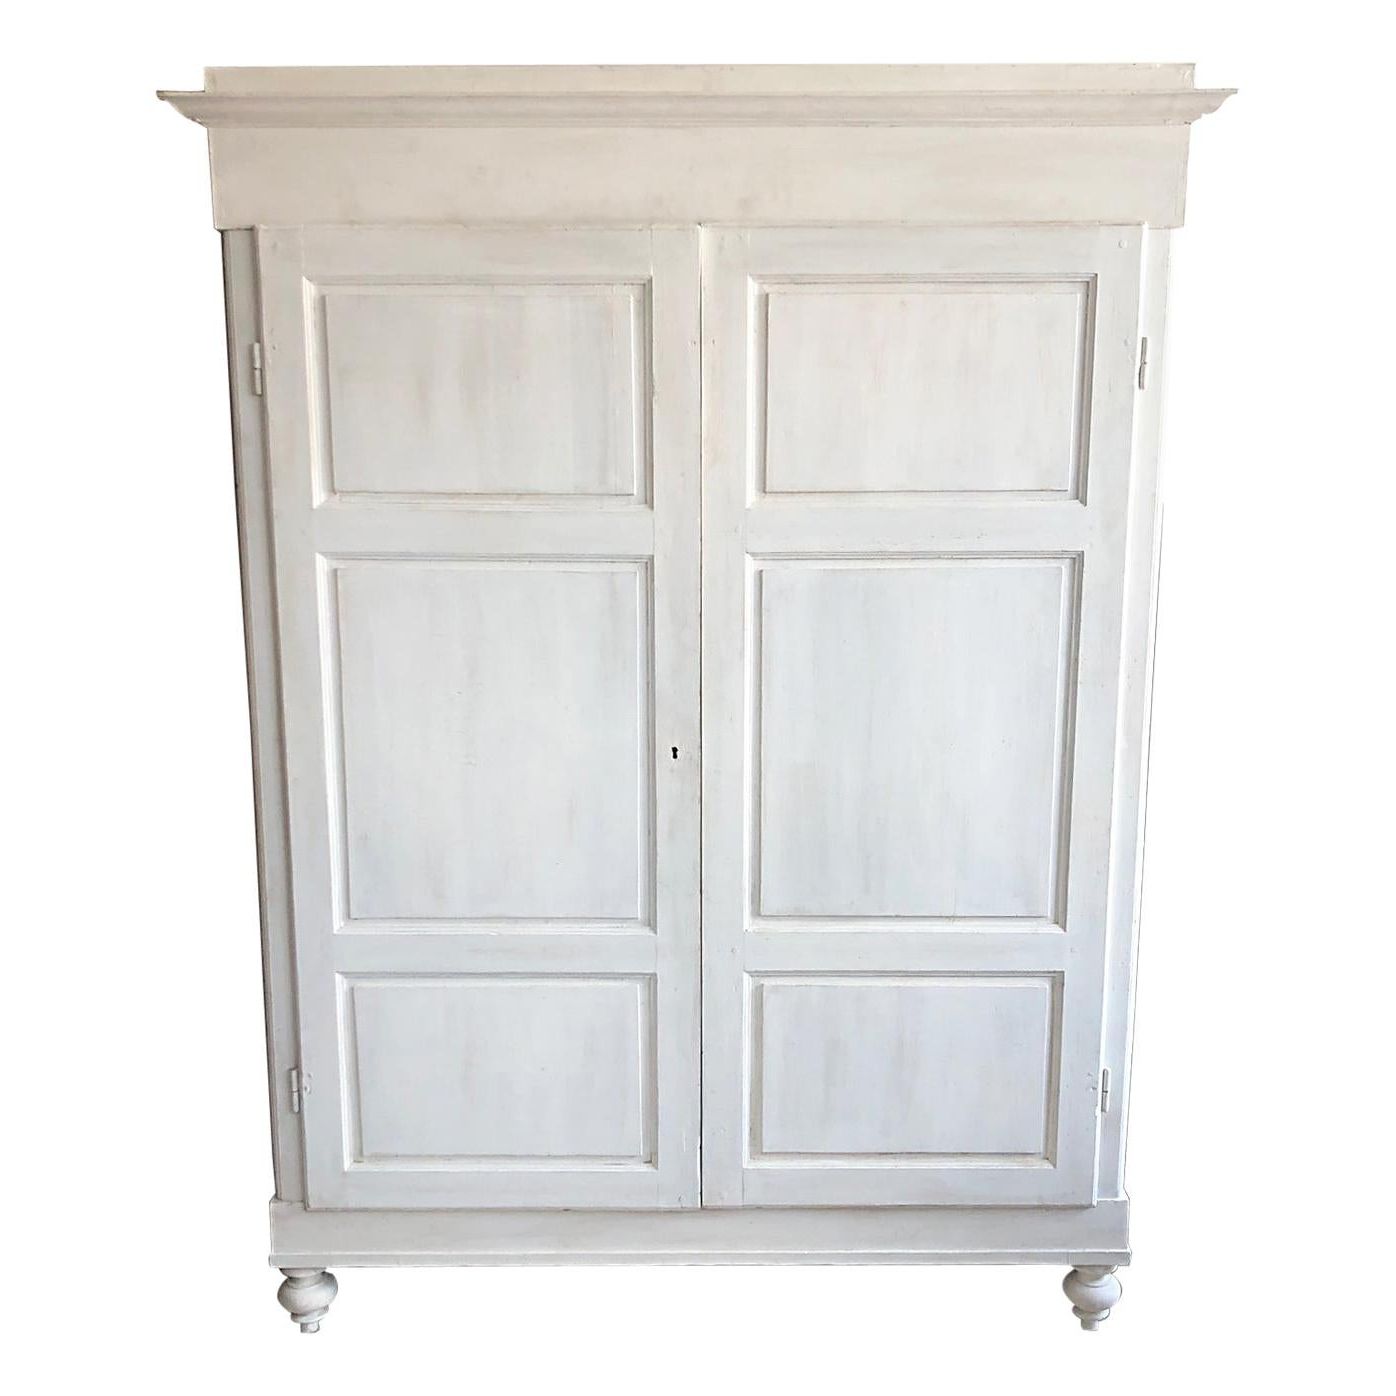 Shabby White Wardrobe, Original Italian Two Internal Drawers For Sale At  1stdibs Pertaining To White Shabby Chic Wardrobes (Gallery 7 of 20)